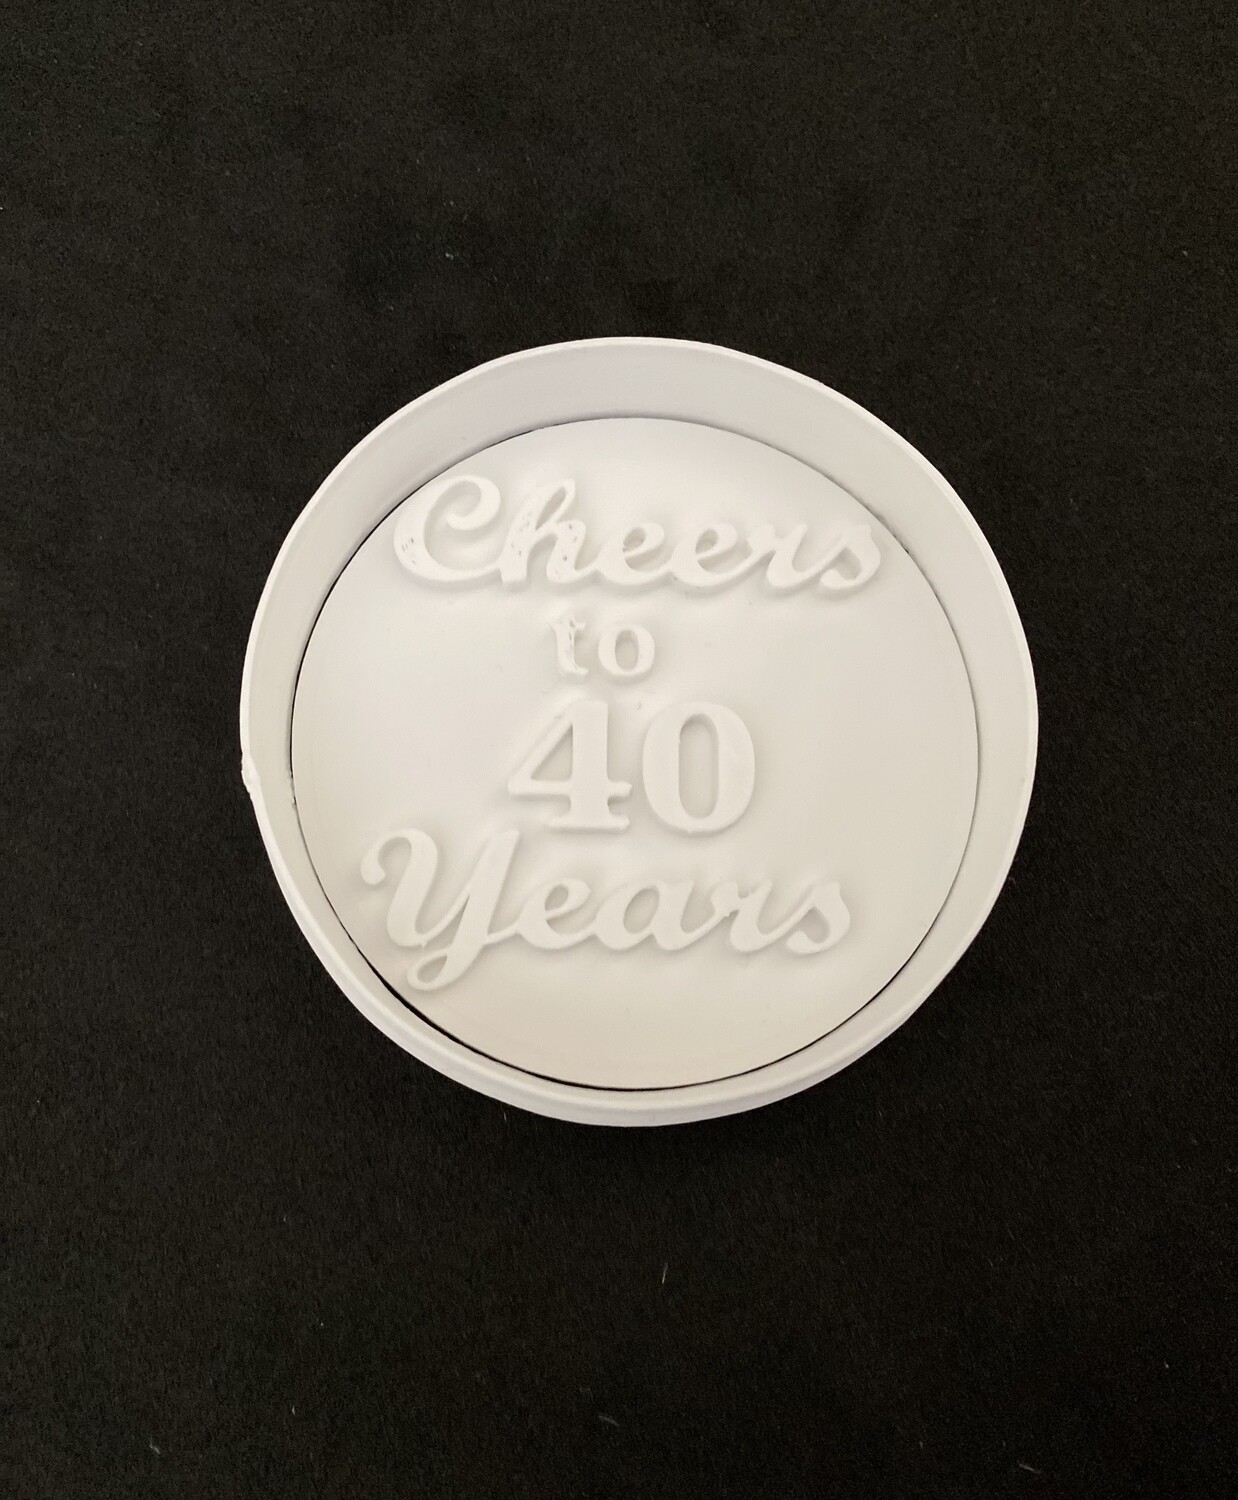 Cheers to 40 years